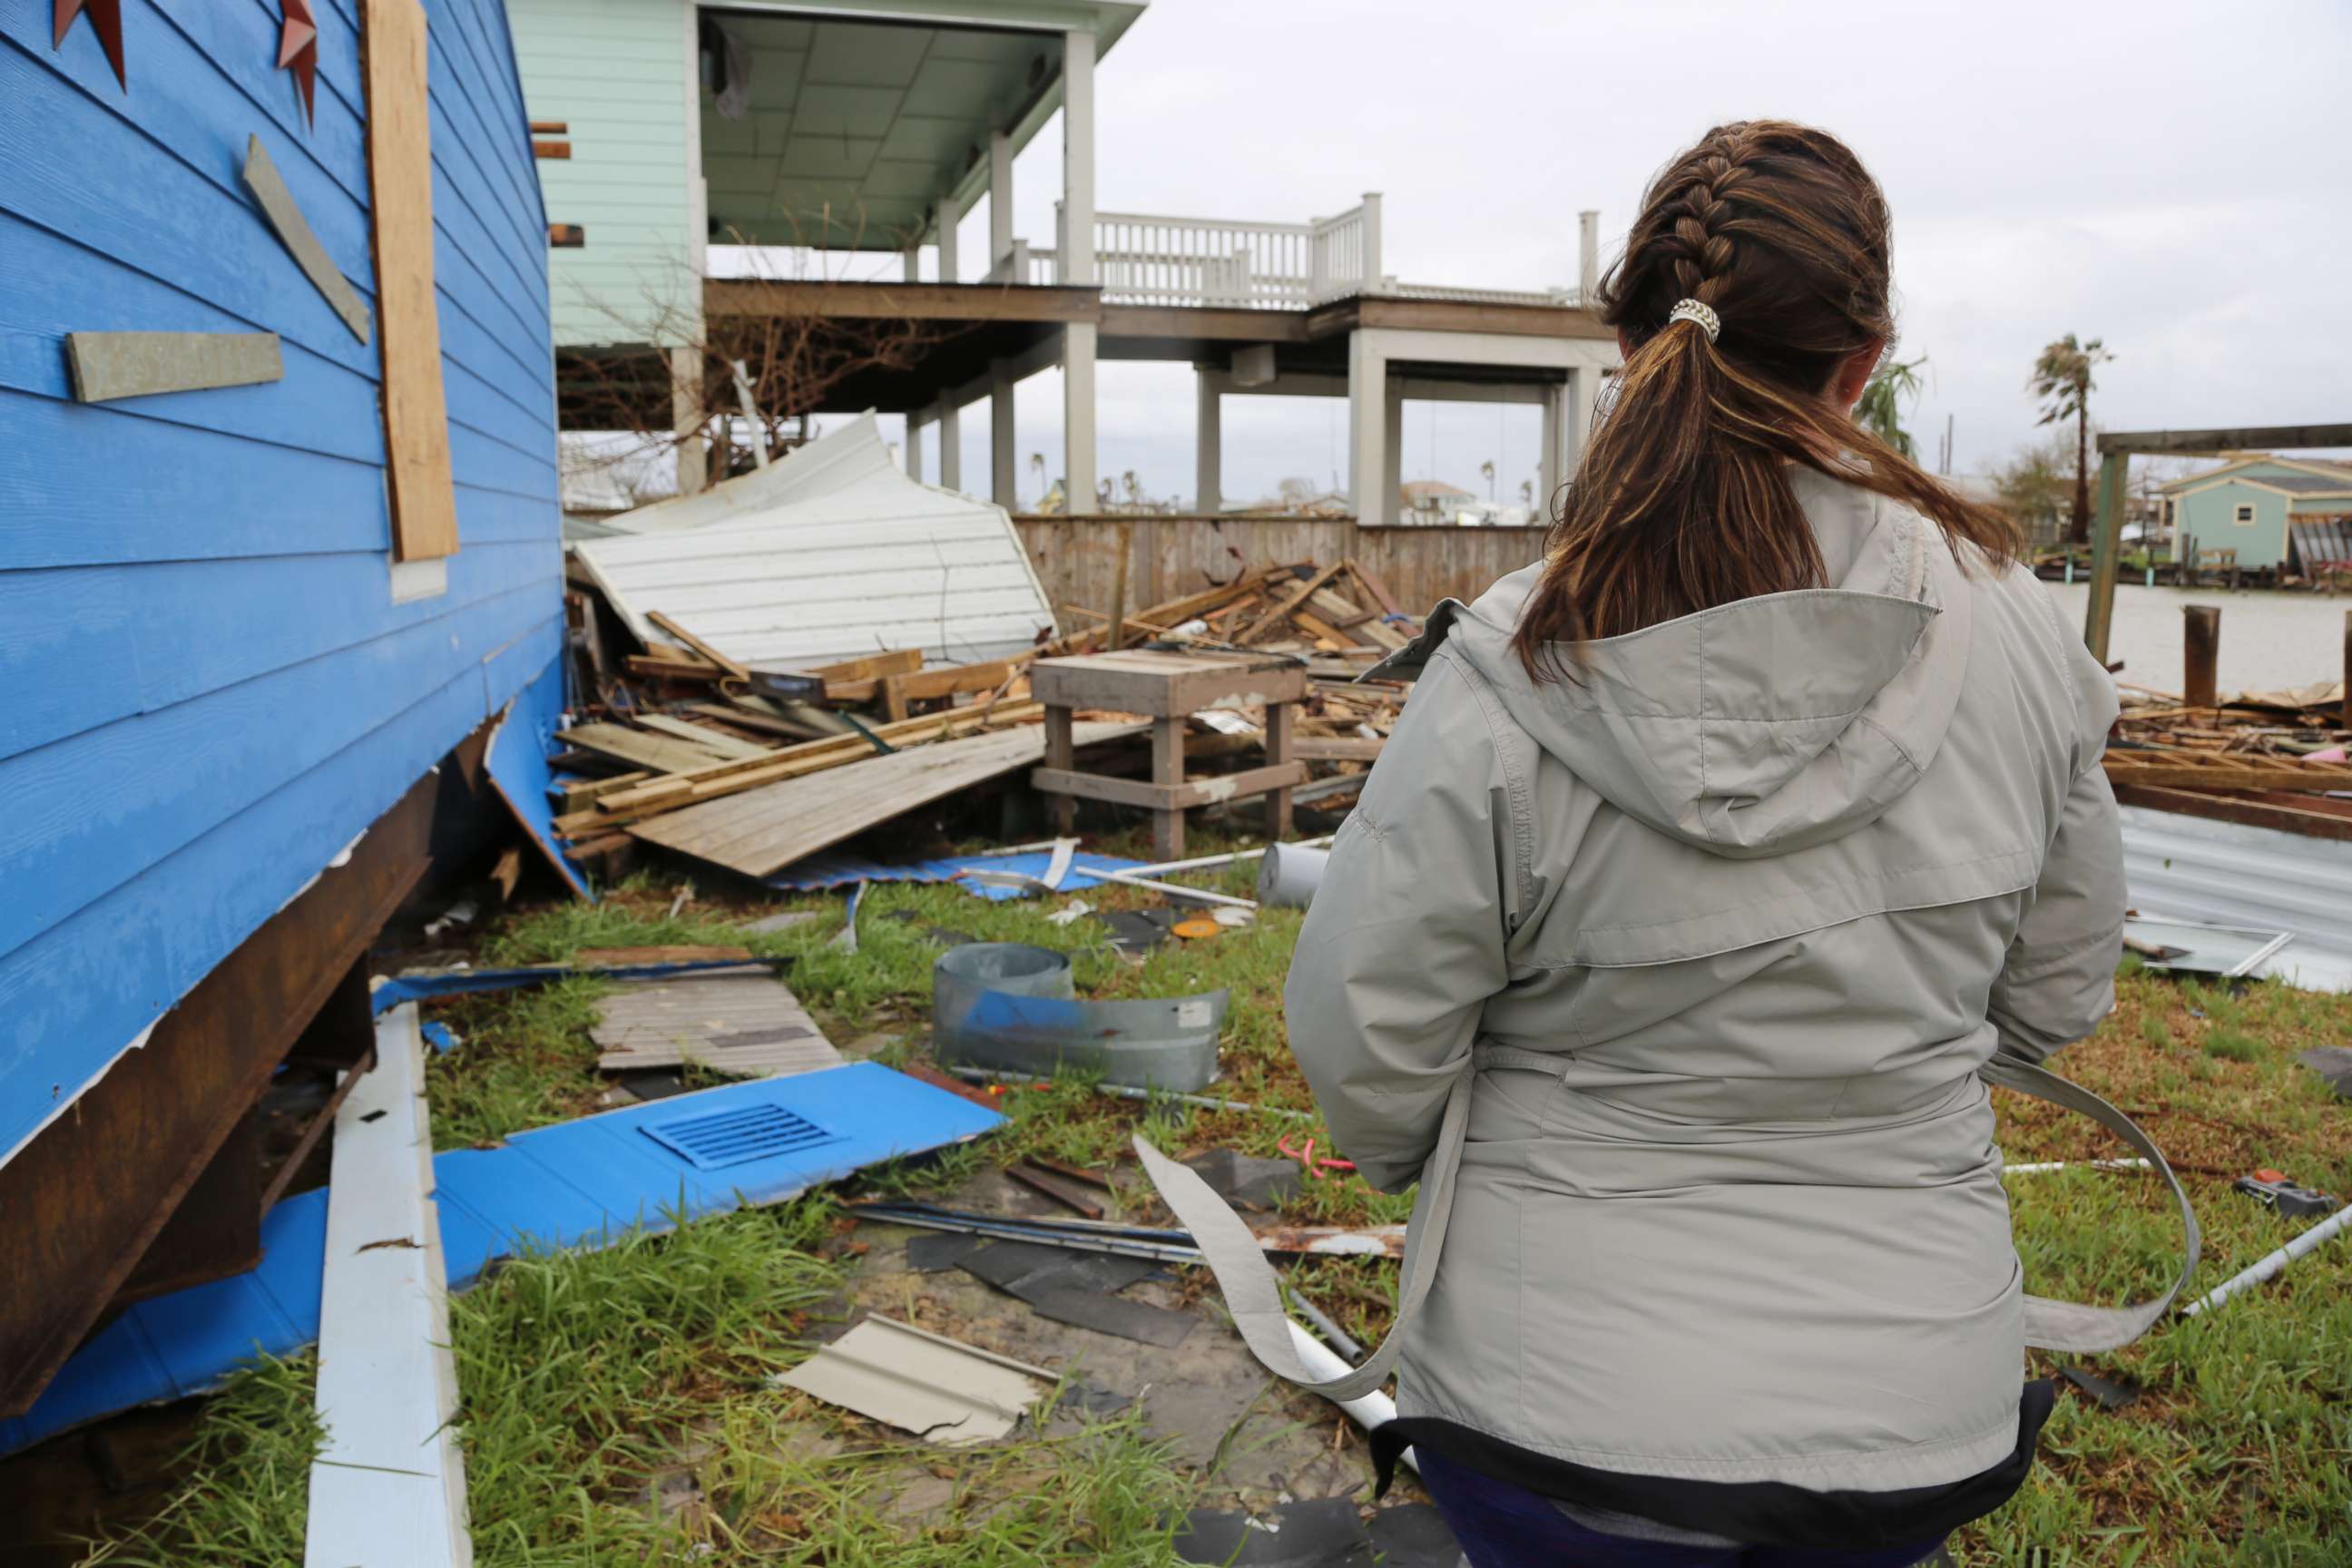 PHOTO: Christina and Jared Jellison assess damage to their vacation home caused by Hurricane Harvey in Rockport, Texas on Aug. 28, 2017.